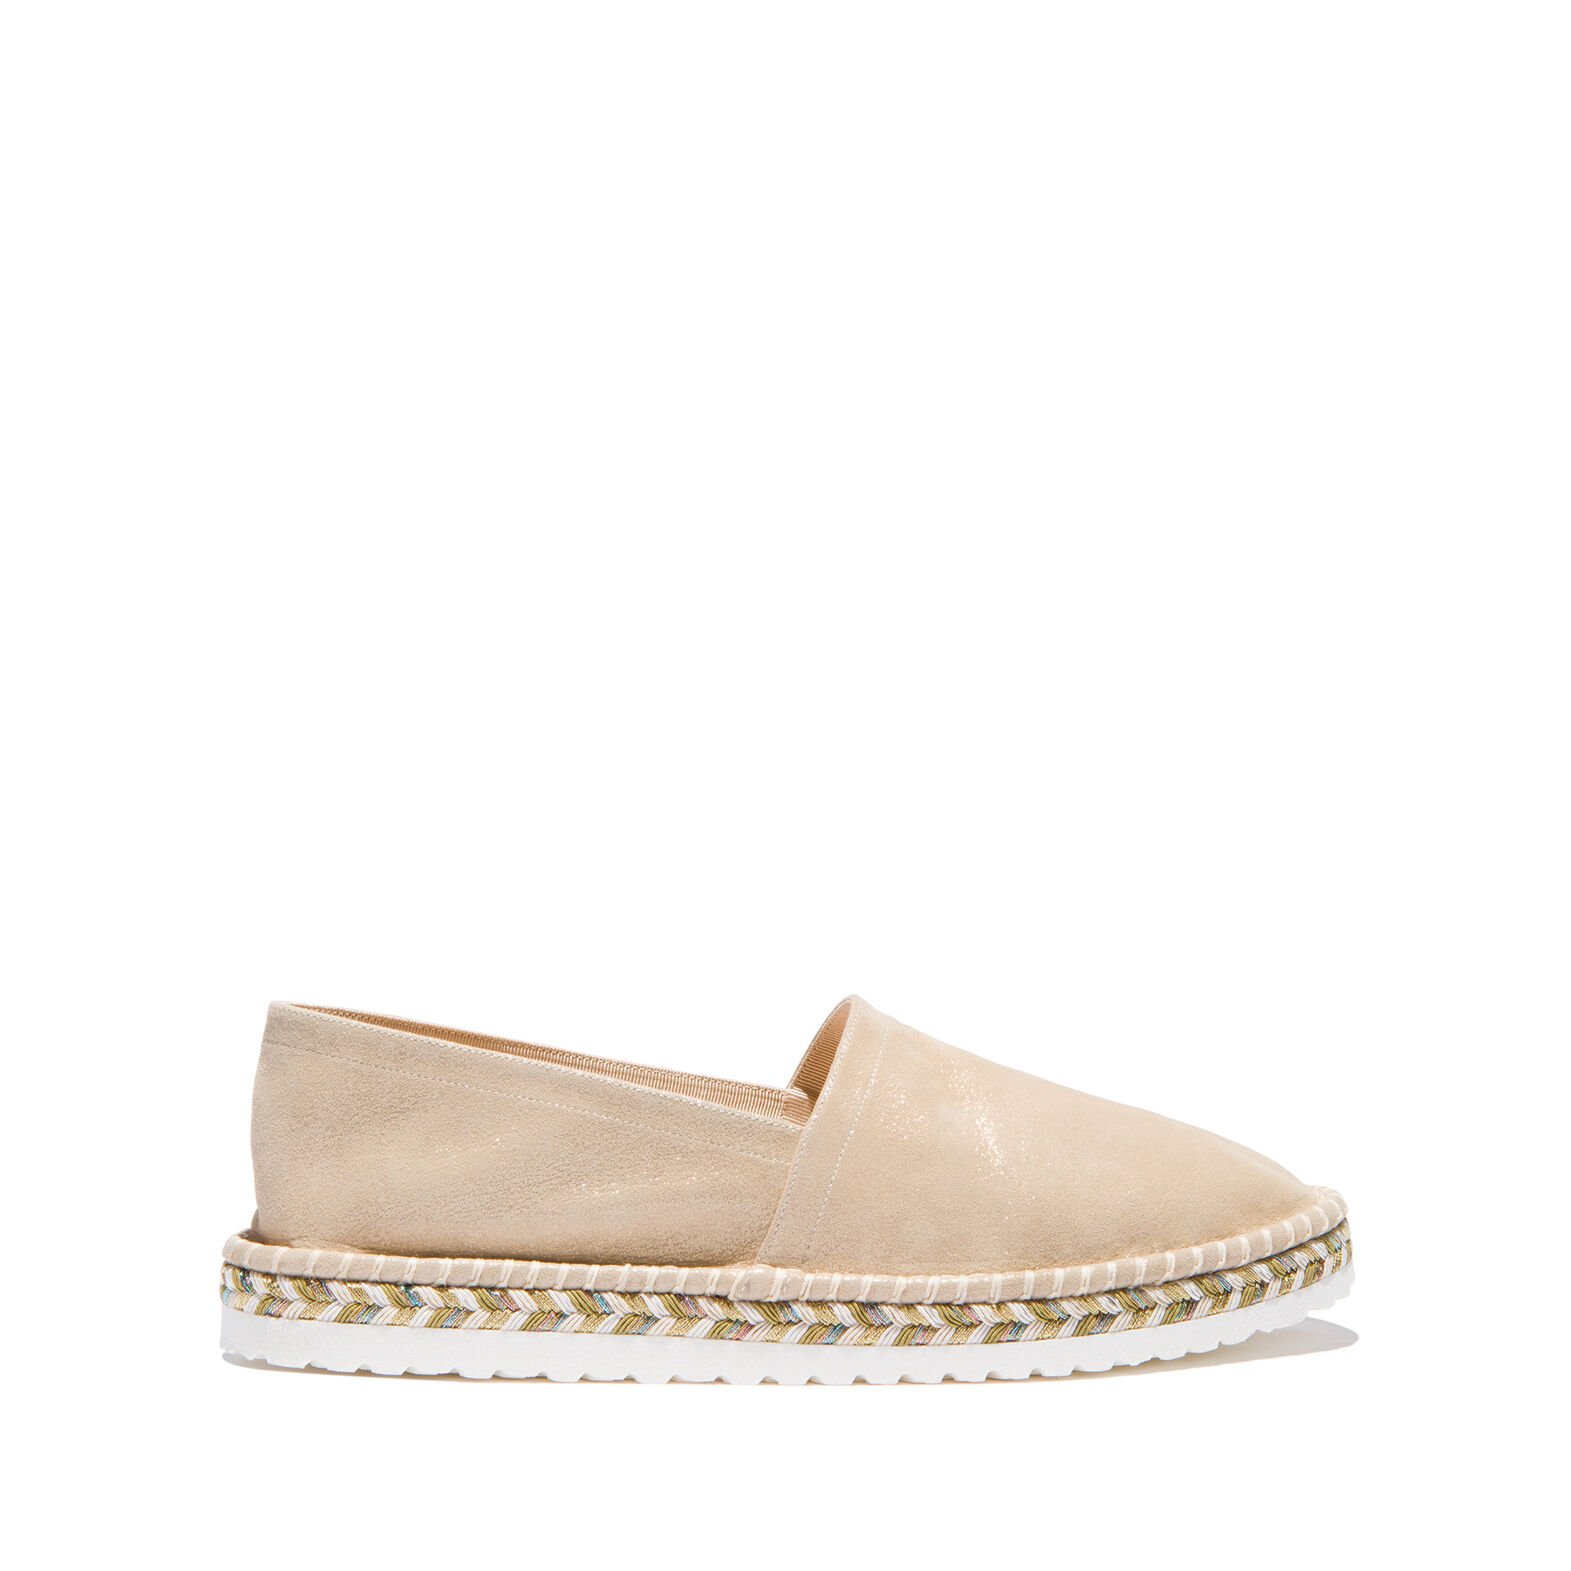 Espadrilles - Paled Gold Flats in Suede | Casadei